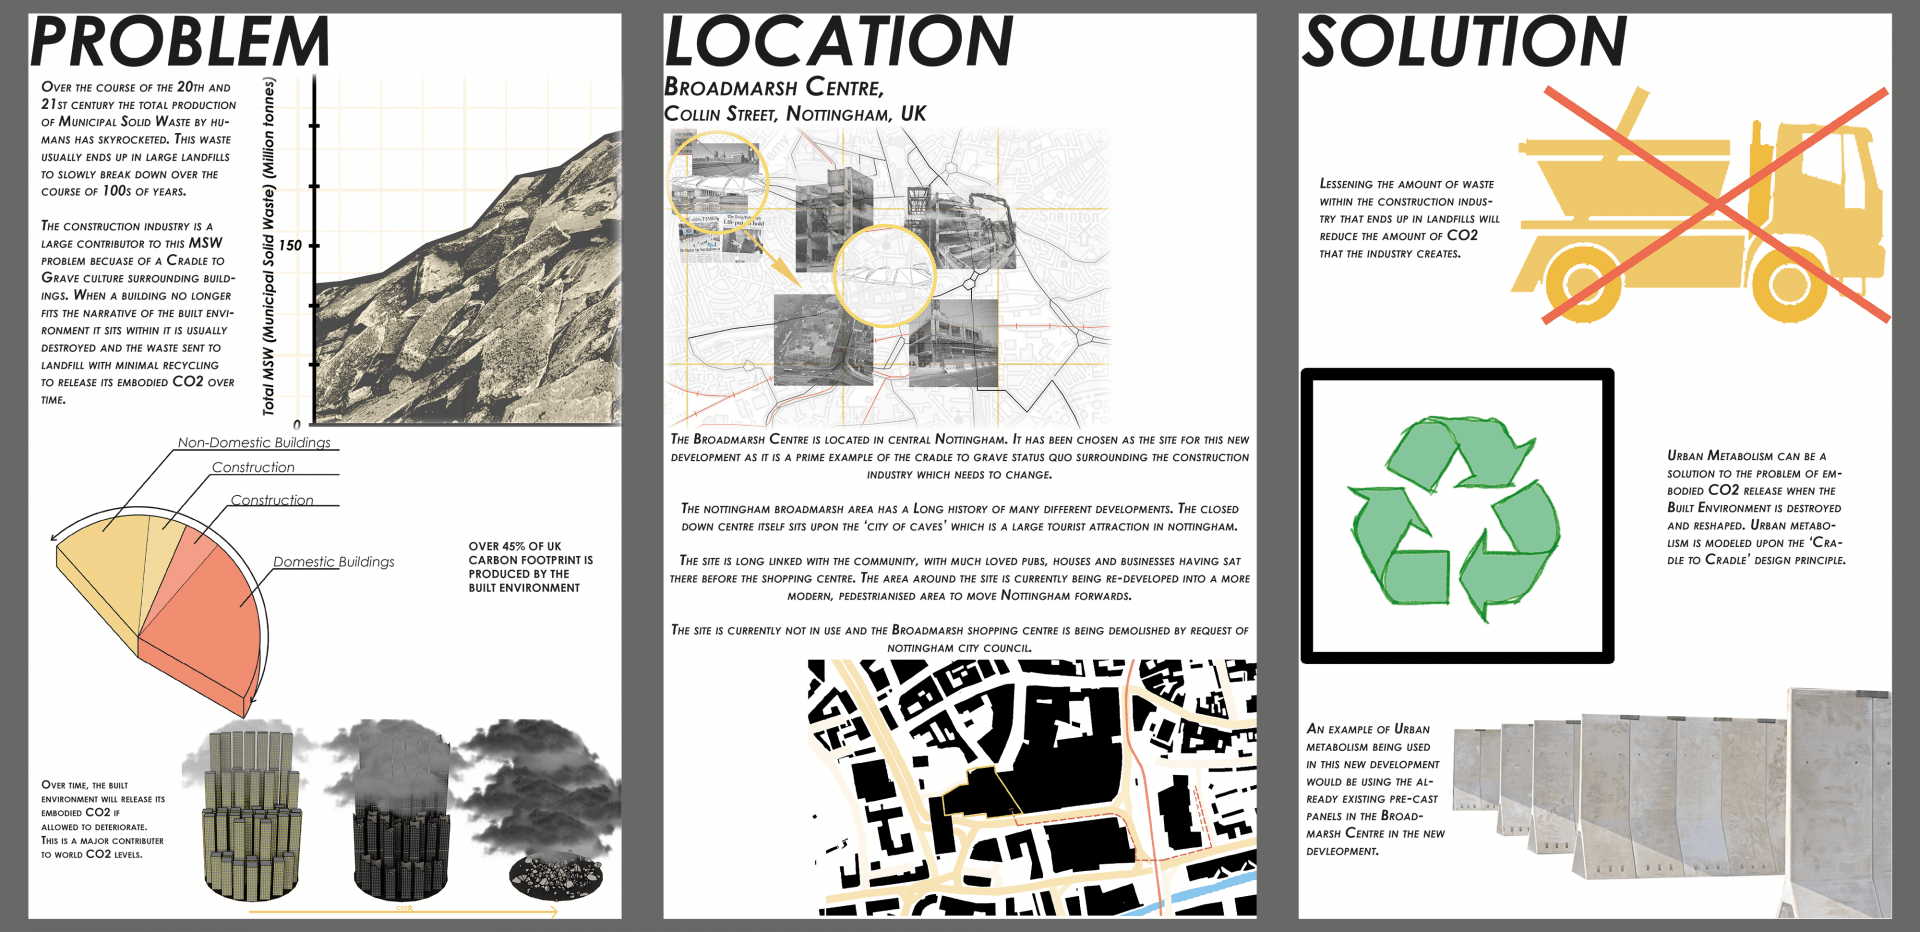 Graphic to introduce the problem, location and concept for the project.